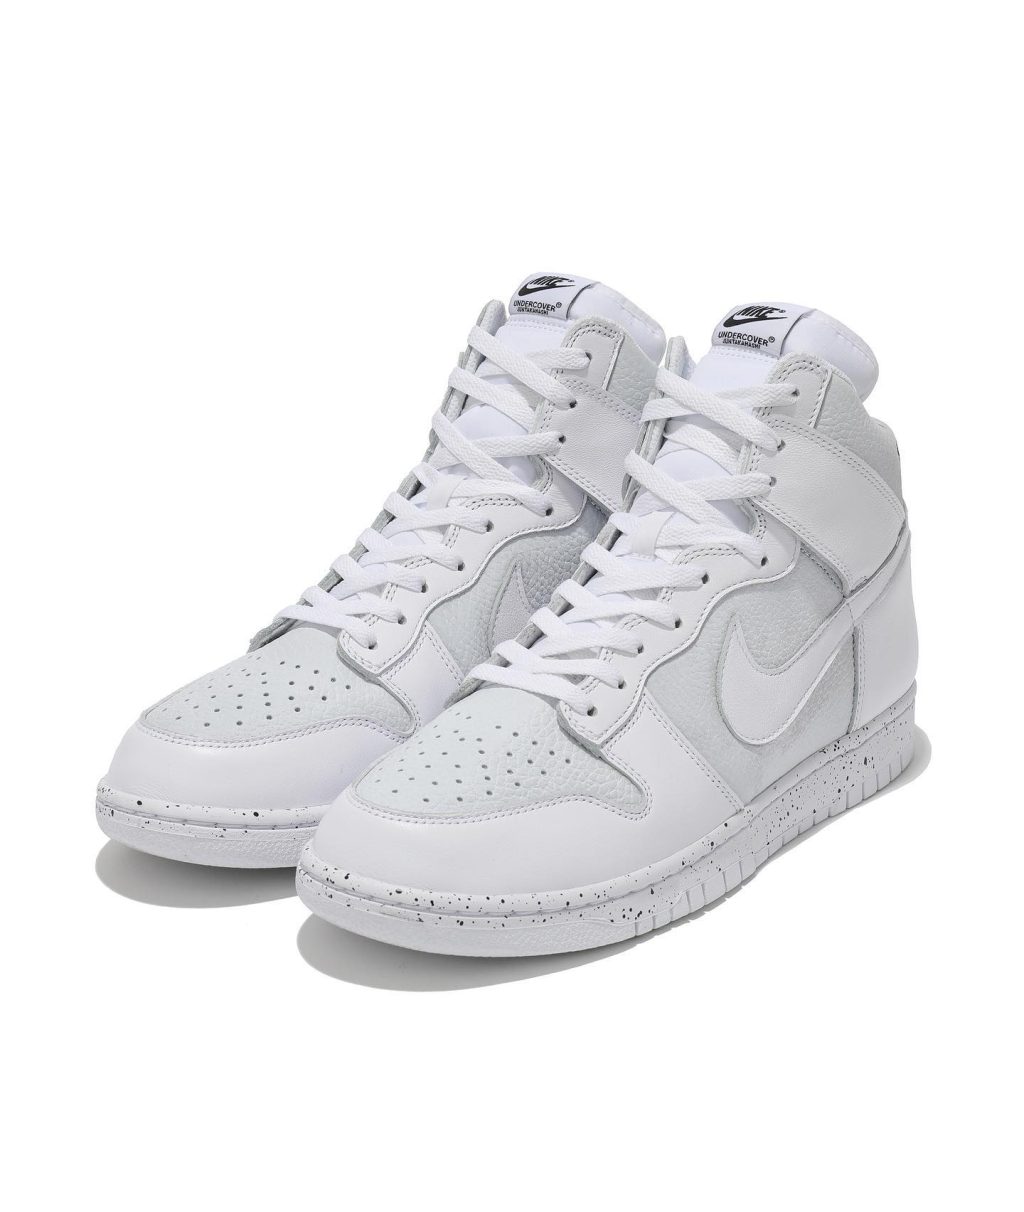 undercover-nike-dunk-high-1985-dq4121-001-100-release-20220228